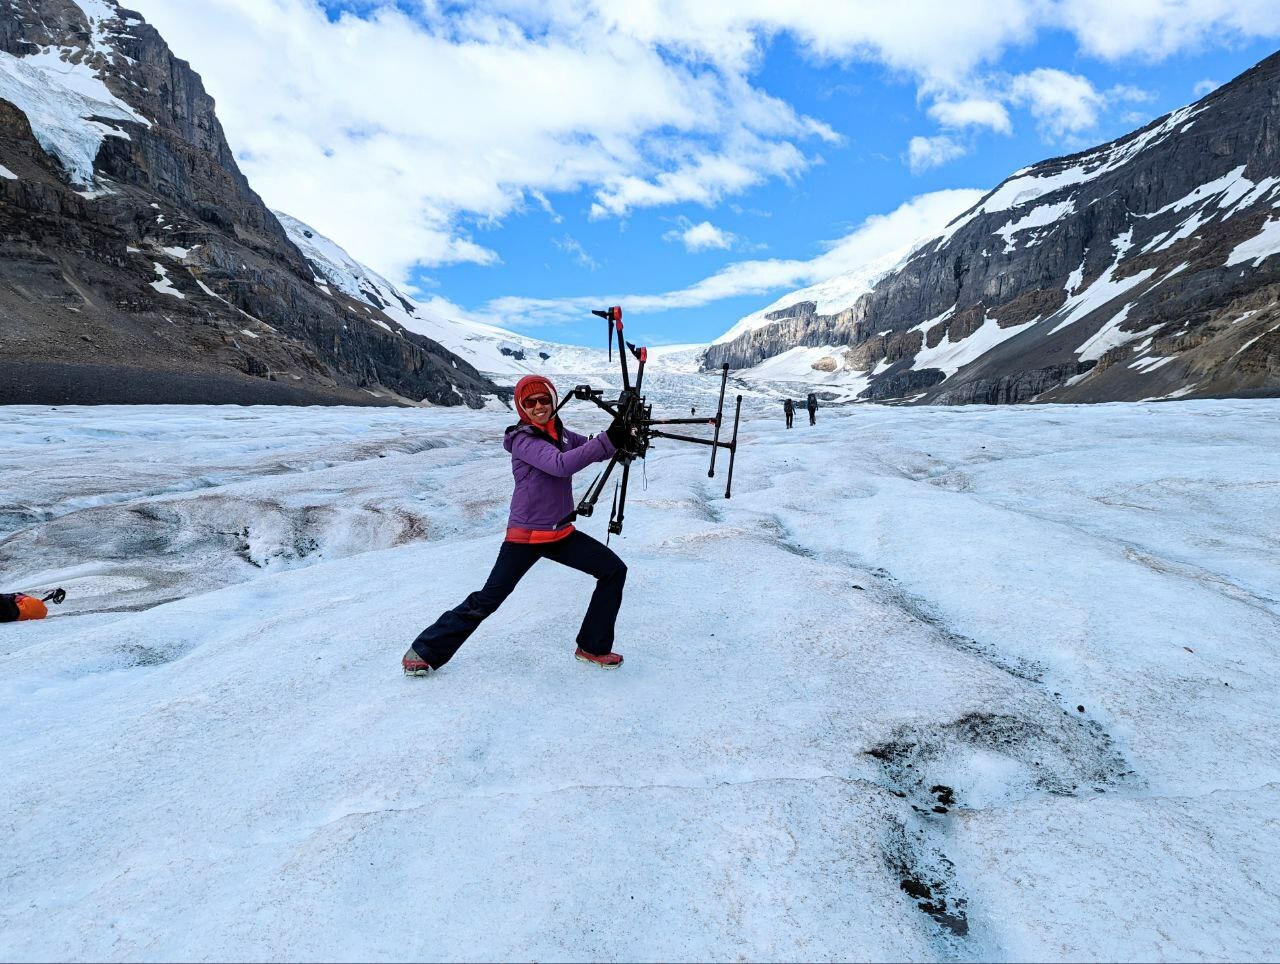 <span style="font-weight: bold;">Athabasca Glacier</span><br>